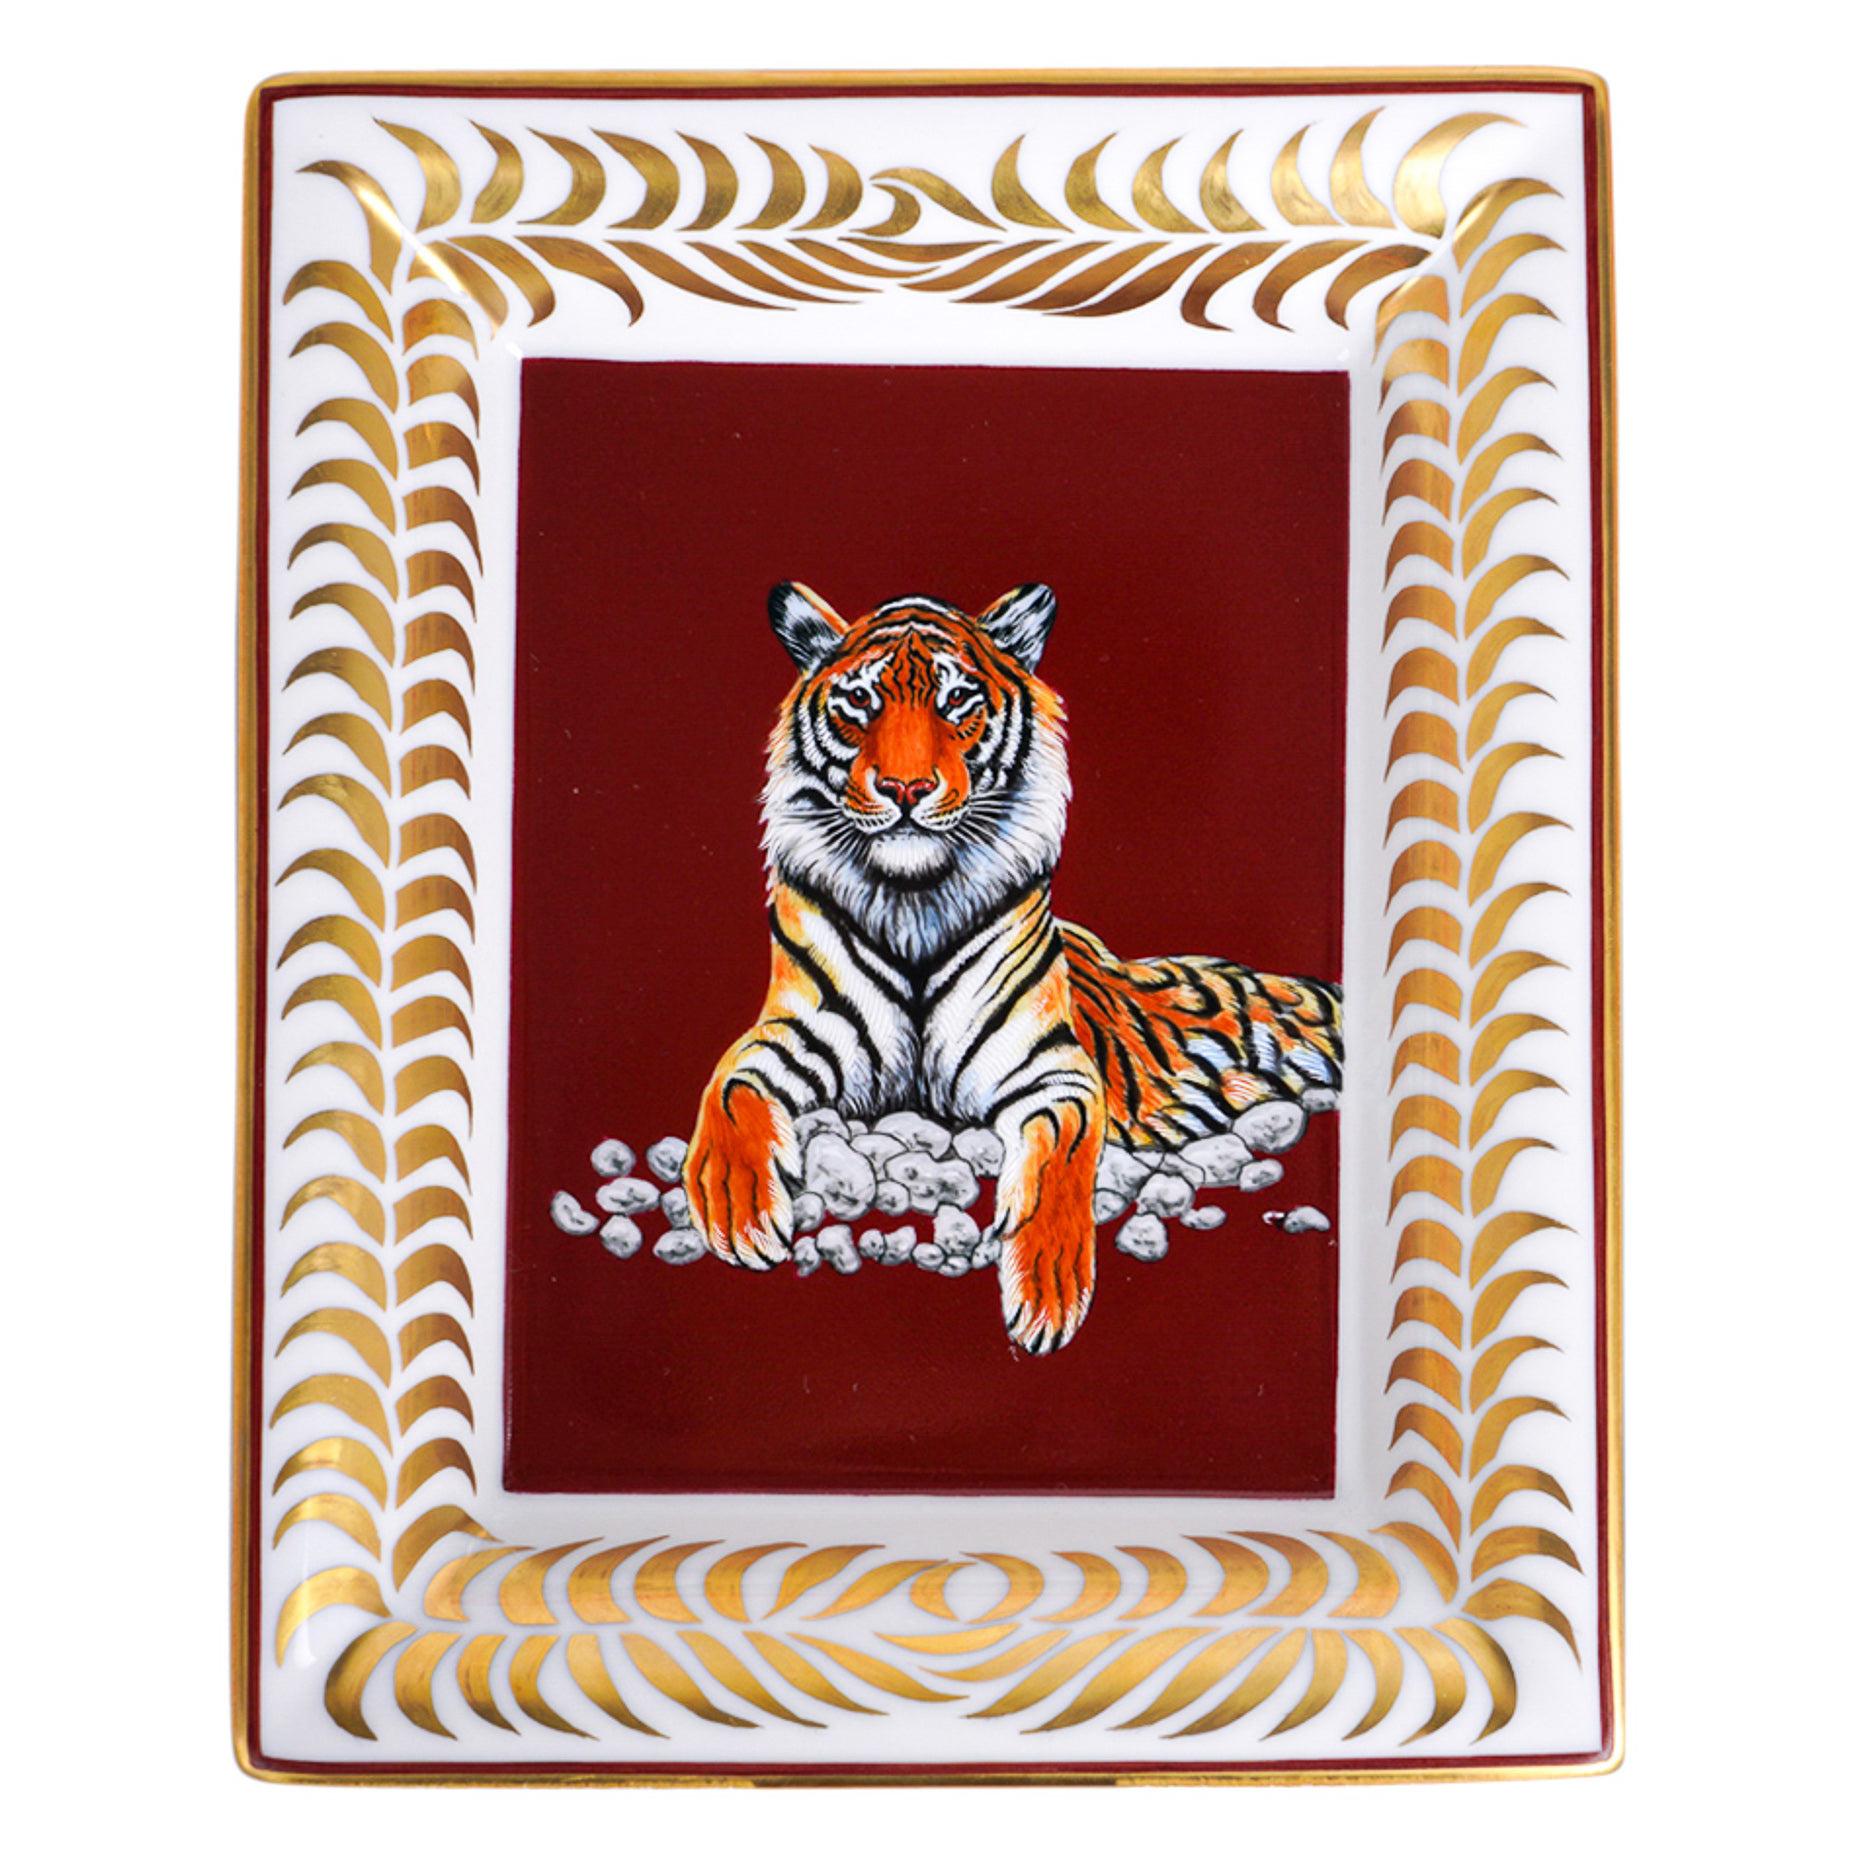 Hermes Change Tray Tigre Royal Or/Rouge Hand Painted New w/ Box